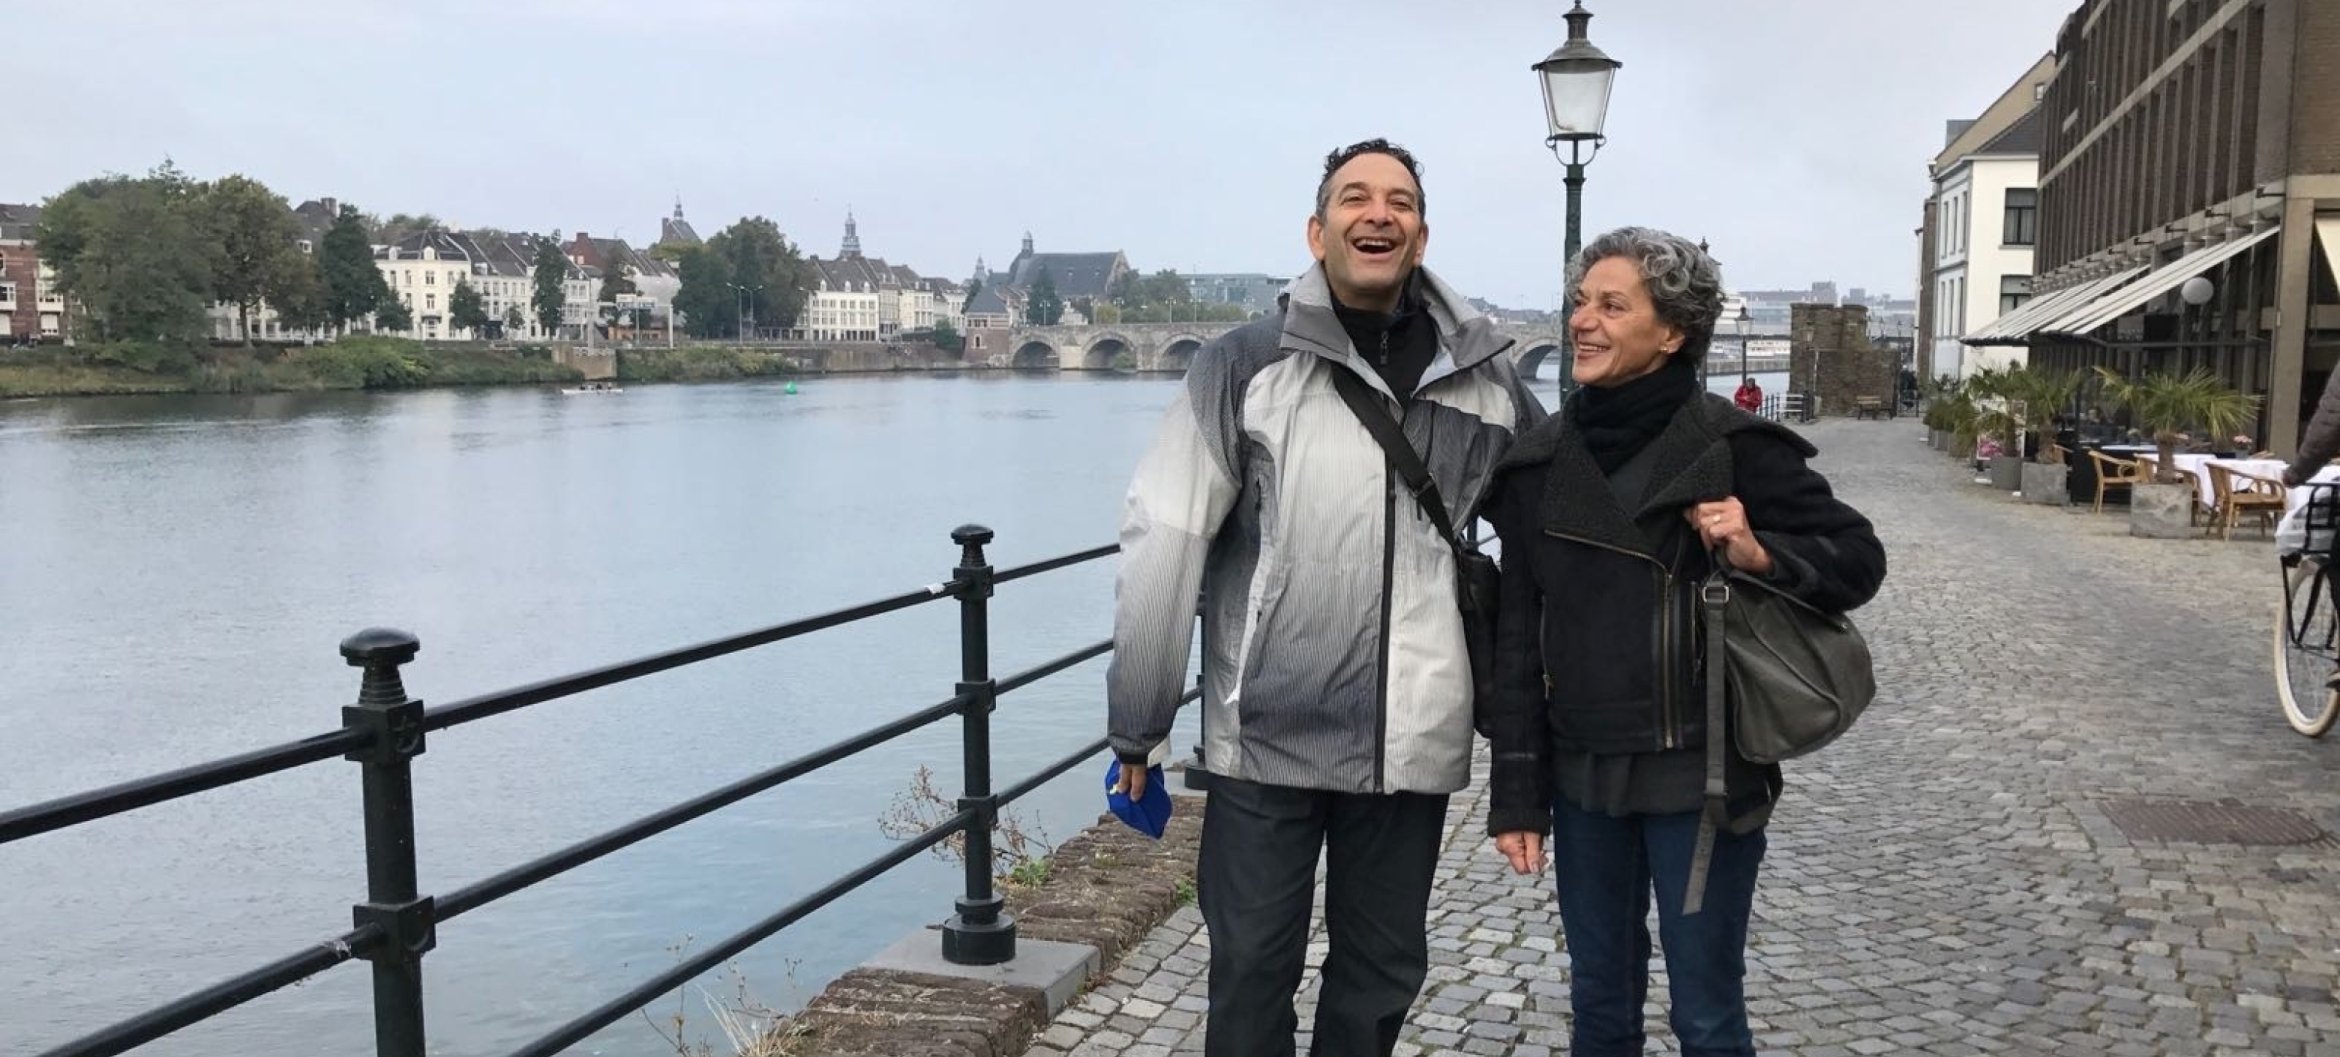 Marta enjoying Maastricht with her colleague Aryeh, going to see a performance